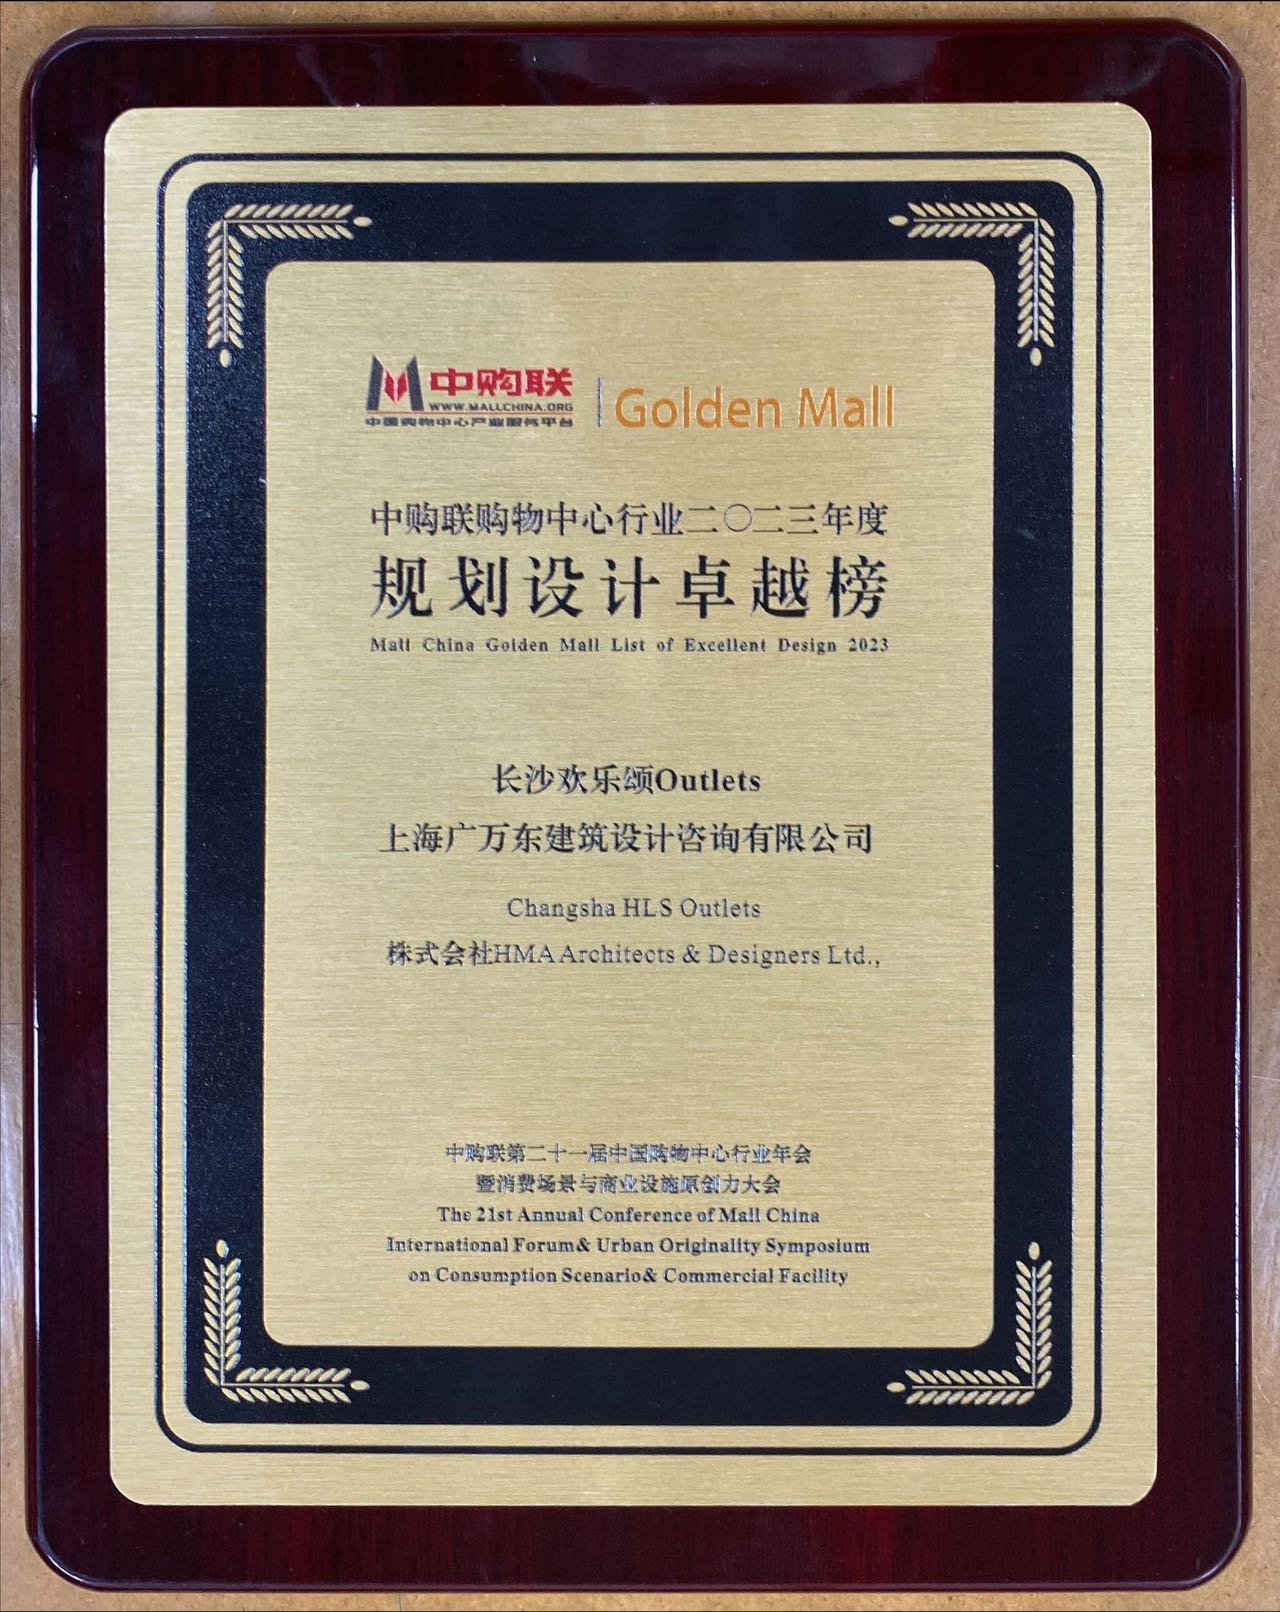 Mall China Golden Mall List of Excellent Design 2023 plaque